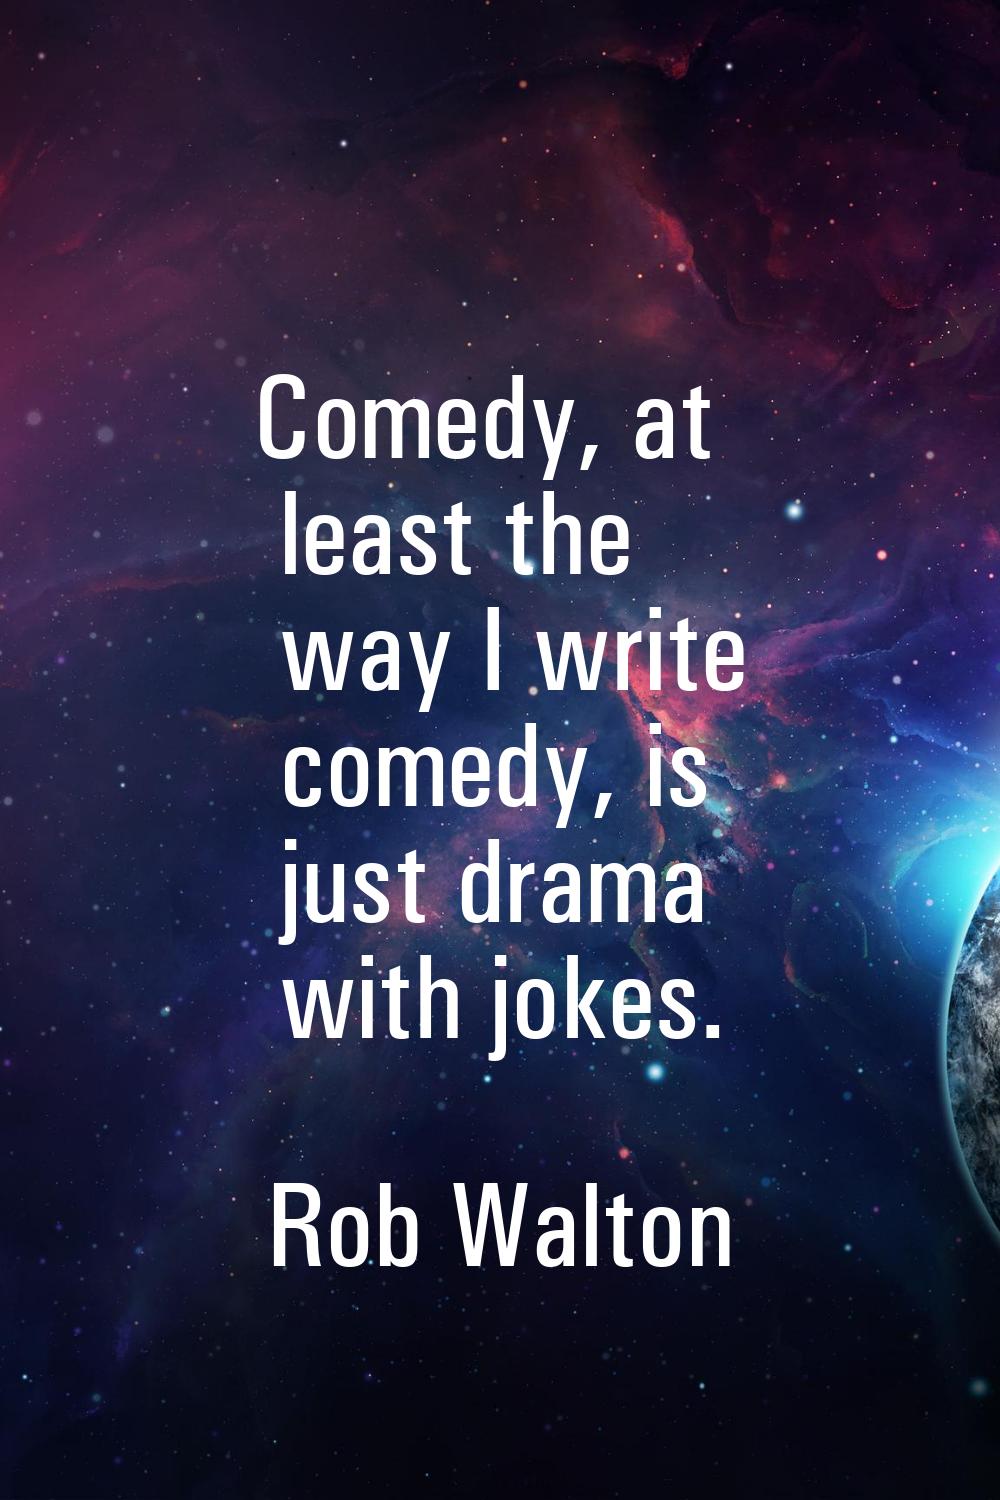 Comedy, at least the way I write comedy, is just drama with jokes.